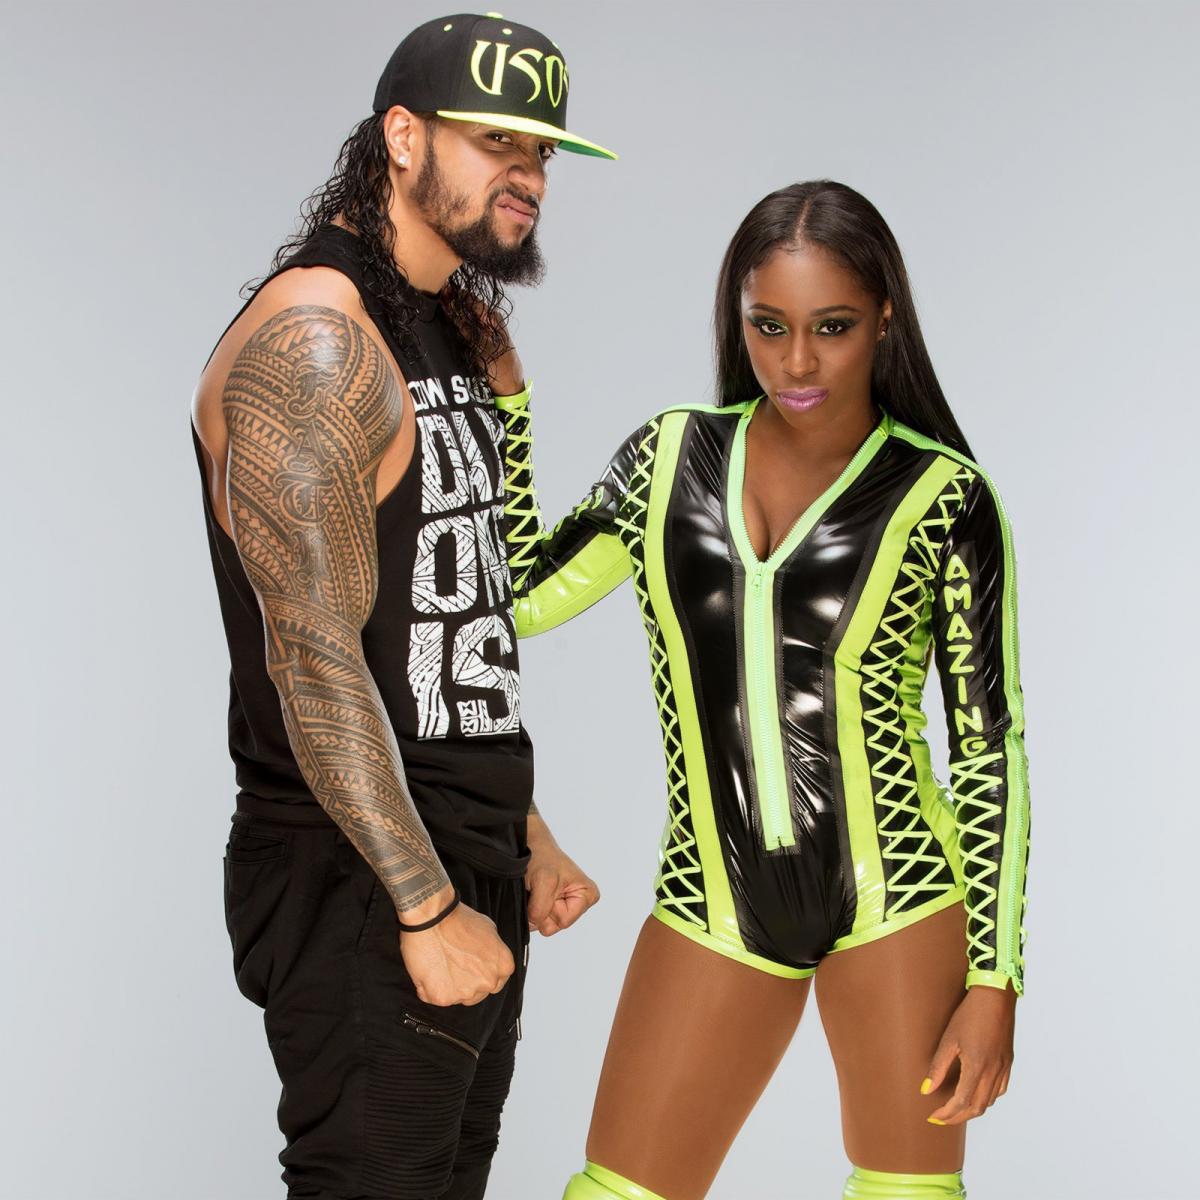 WWE image Jimmy Uso and Naomi HD wallpaper and background photo